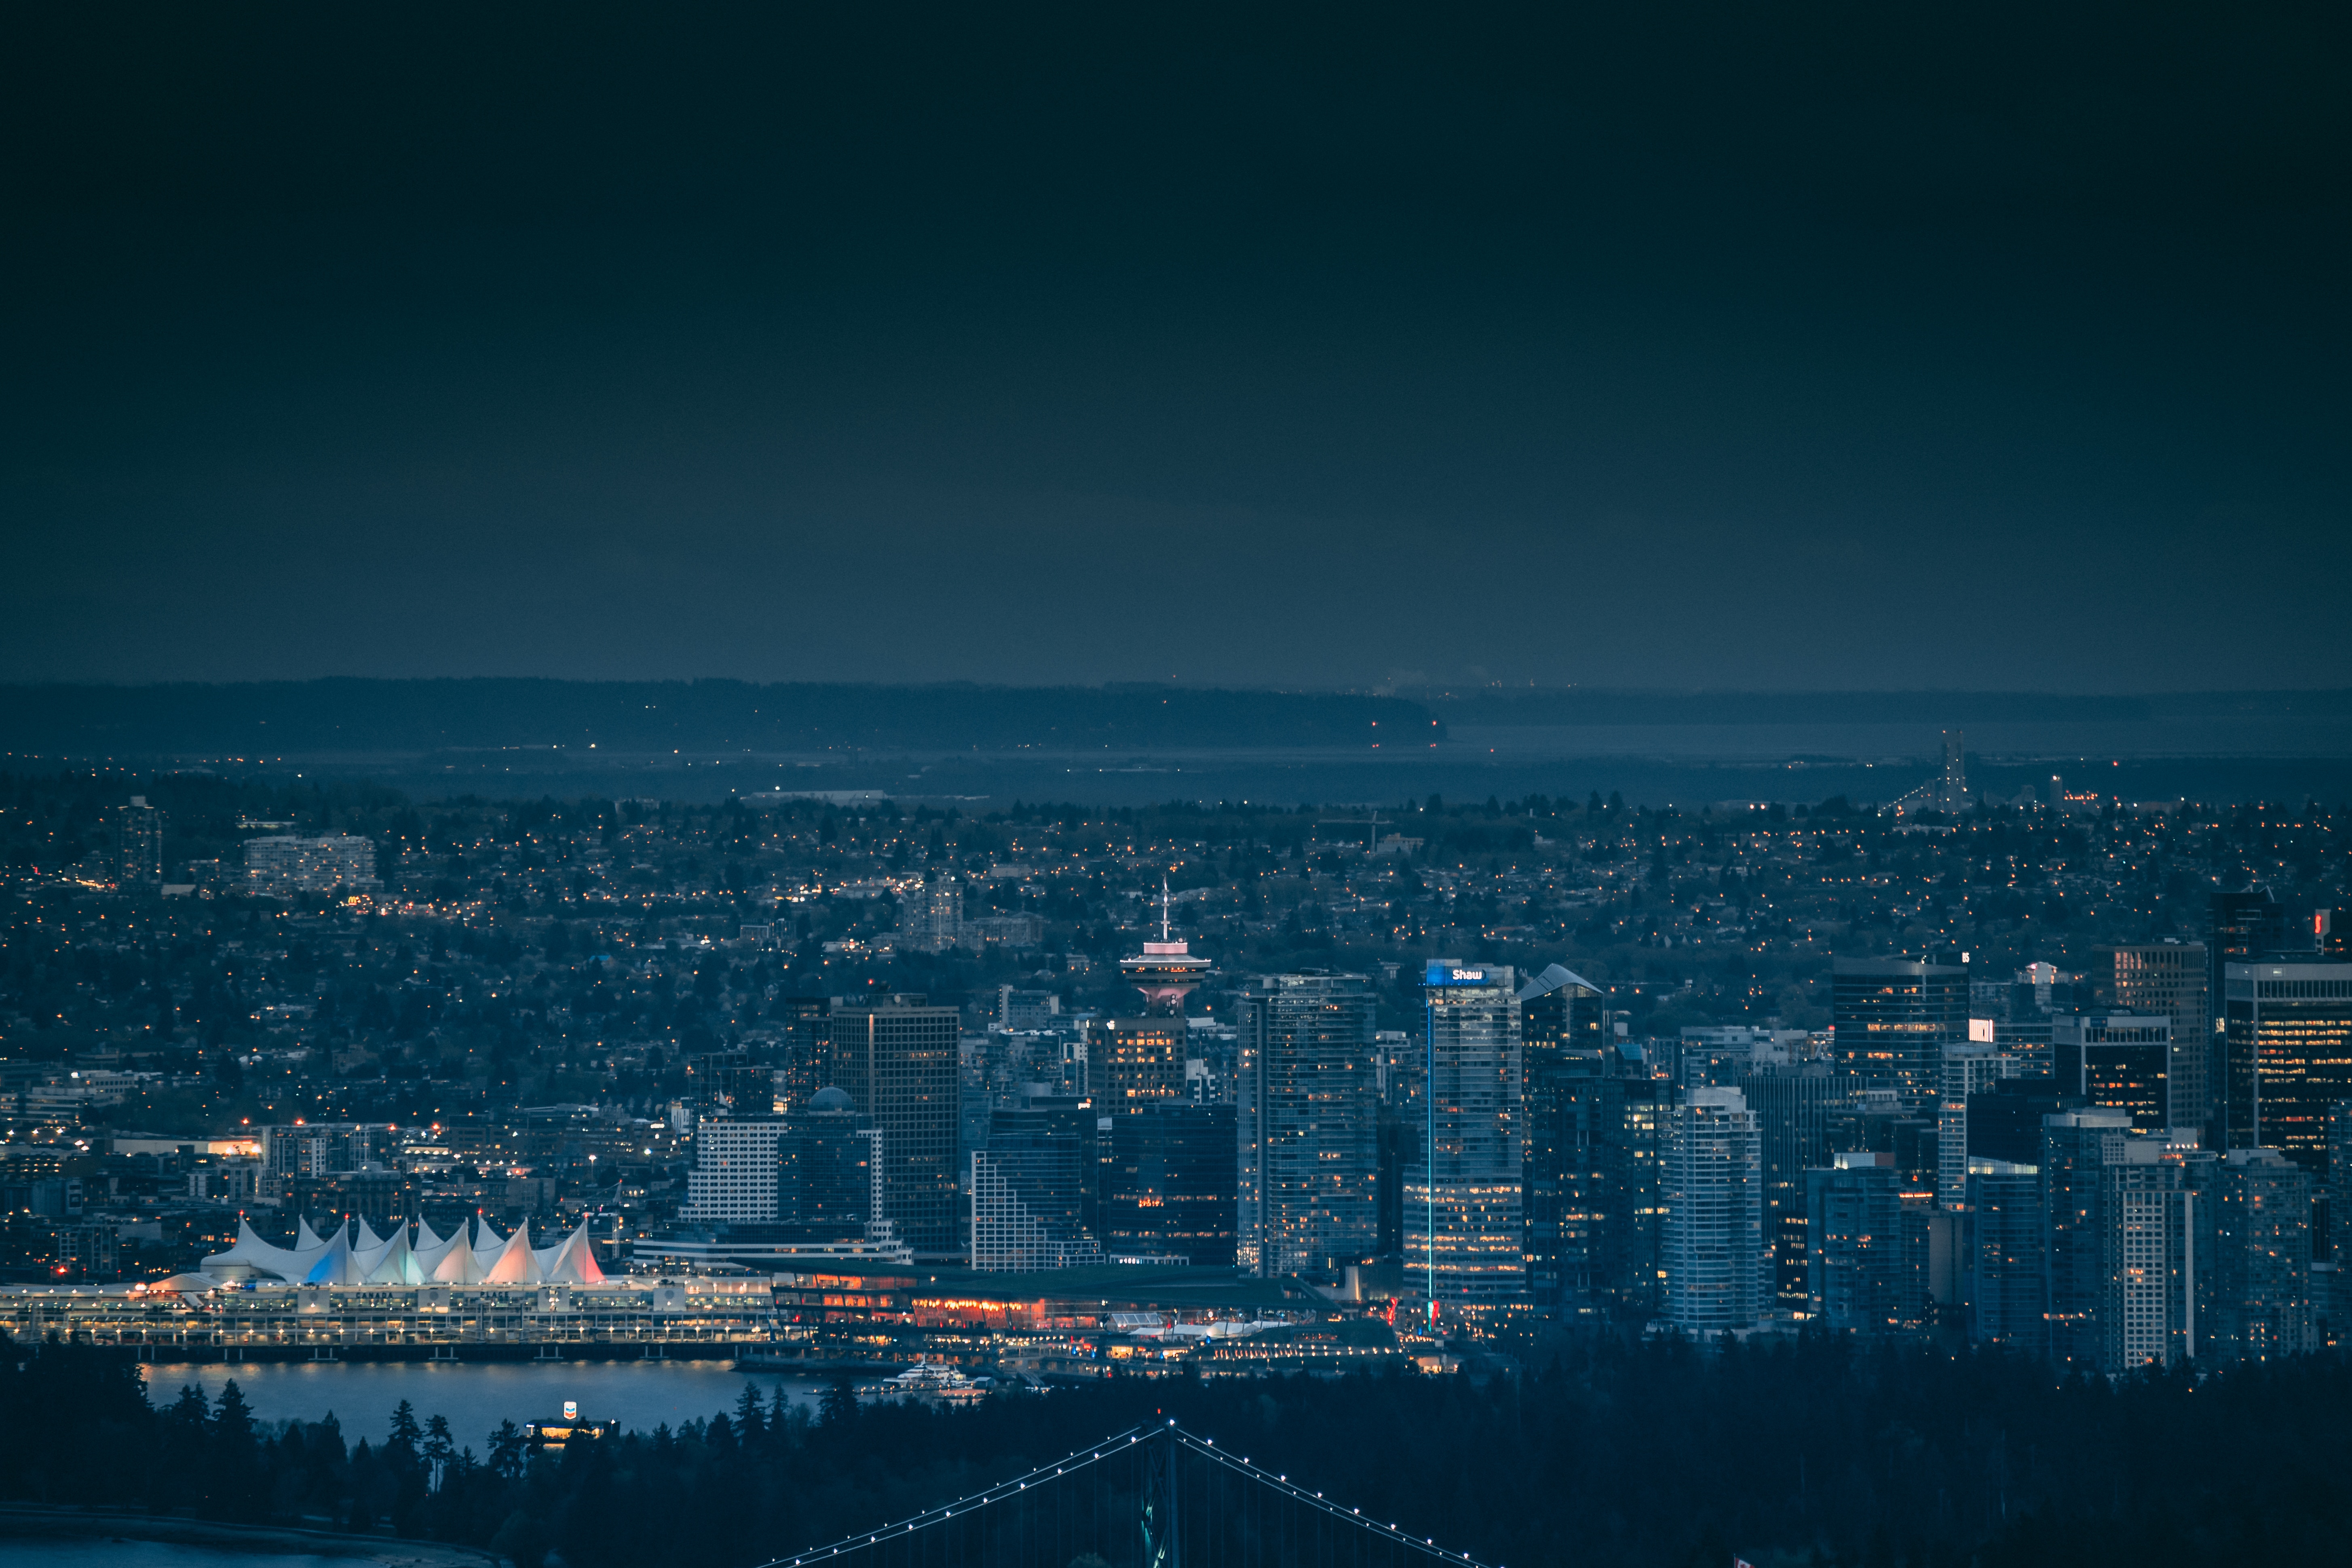 cityscape, megalopolis, cities, canada, night, city lights, darkness, megapolis, urban landscape, vancouver lock screen backgrounds